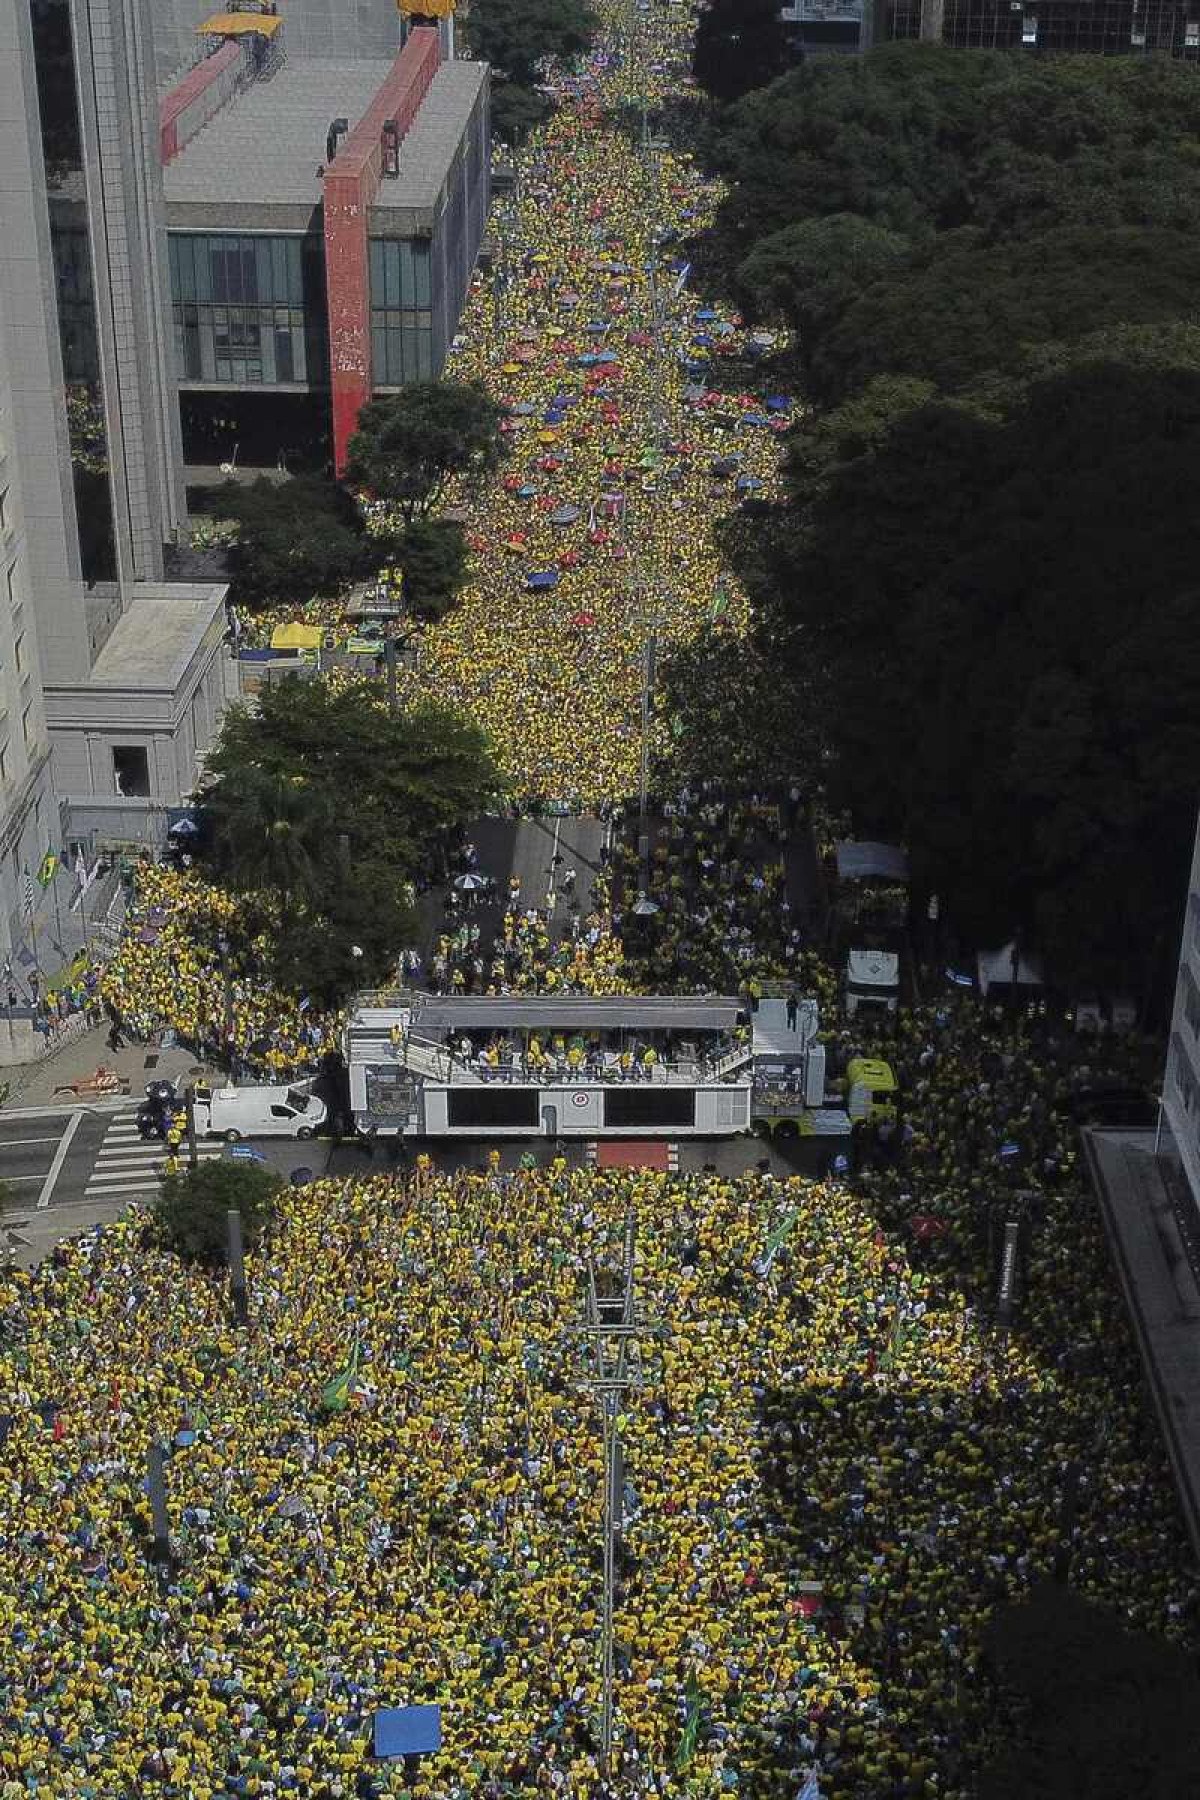  Aerial view showing supporters of former Brazilian President Jair Bolsonaro (2019-2022) attending a rally in Sao Paulo, Brazil, on February 25, 2024, to reject claims he plotted a coup with allies to remain in power after his failed 2022 reelection bid. Investigators say the far-right ex-army captain led a plot to falsely discredit the Brazilian election system and prevent the winner of the vote, leftist President Luiz Inacio Lula da Silva, from taking power. A week after Lula took office on January 1, 2023, thousands of Bolsonaro supporters stormed the presidential palace, Congress and Supreme Court, urging the military to intervene to overturn what they called a stolen election. (Photo by Miguel SCHINCARIOL / AFP)       